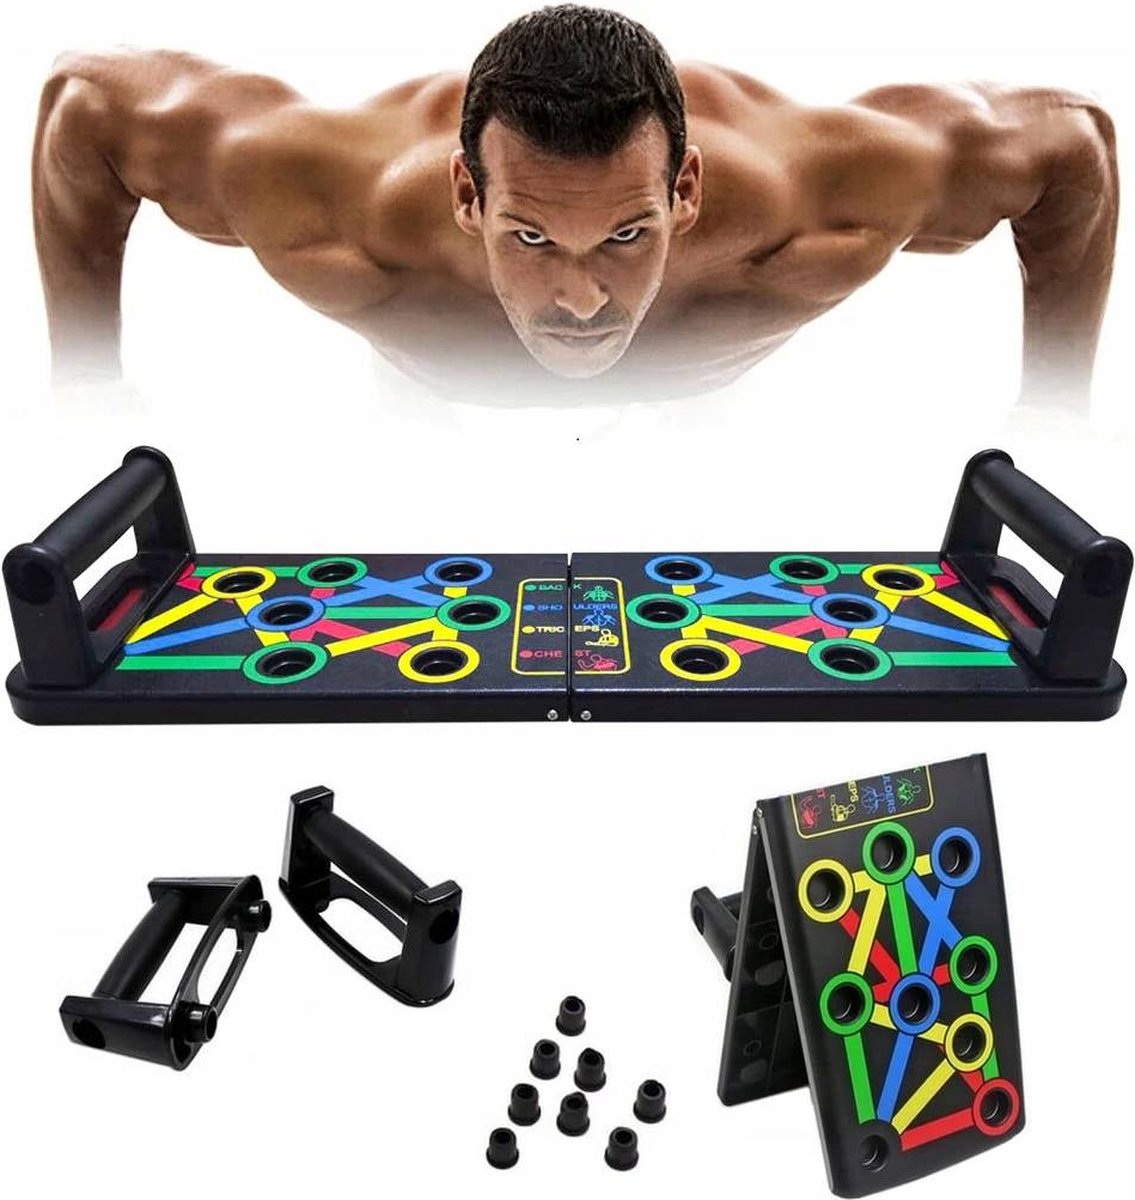 OMNA Push Up Bord - Push Up Board - 14 in 1 - Fitness - Opdruk Steunen - Home Workout - Kracht Training